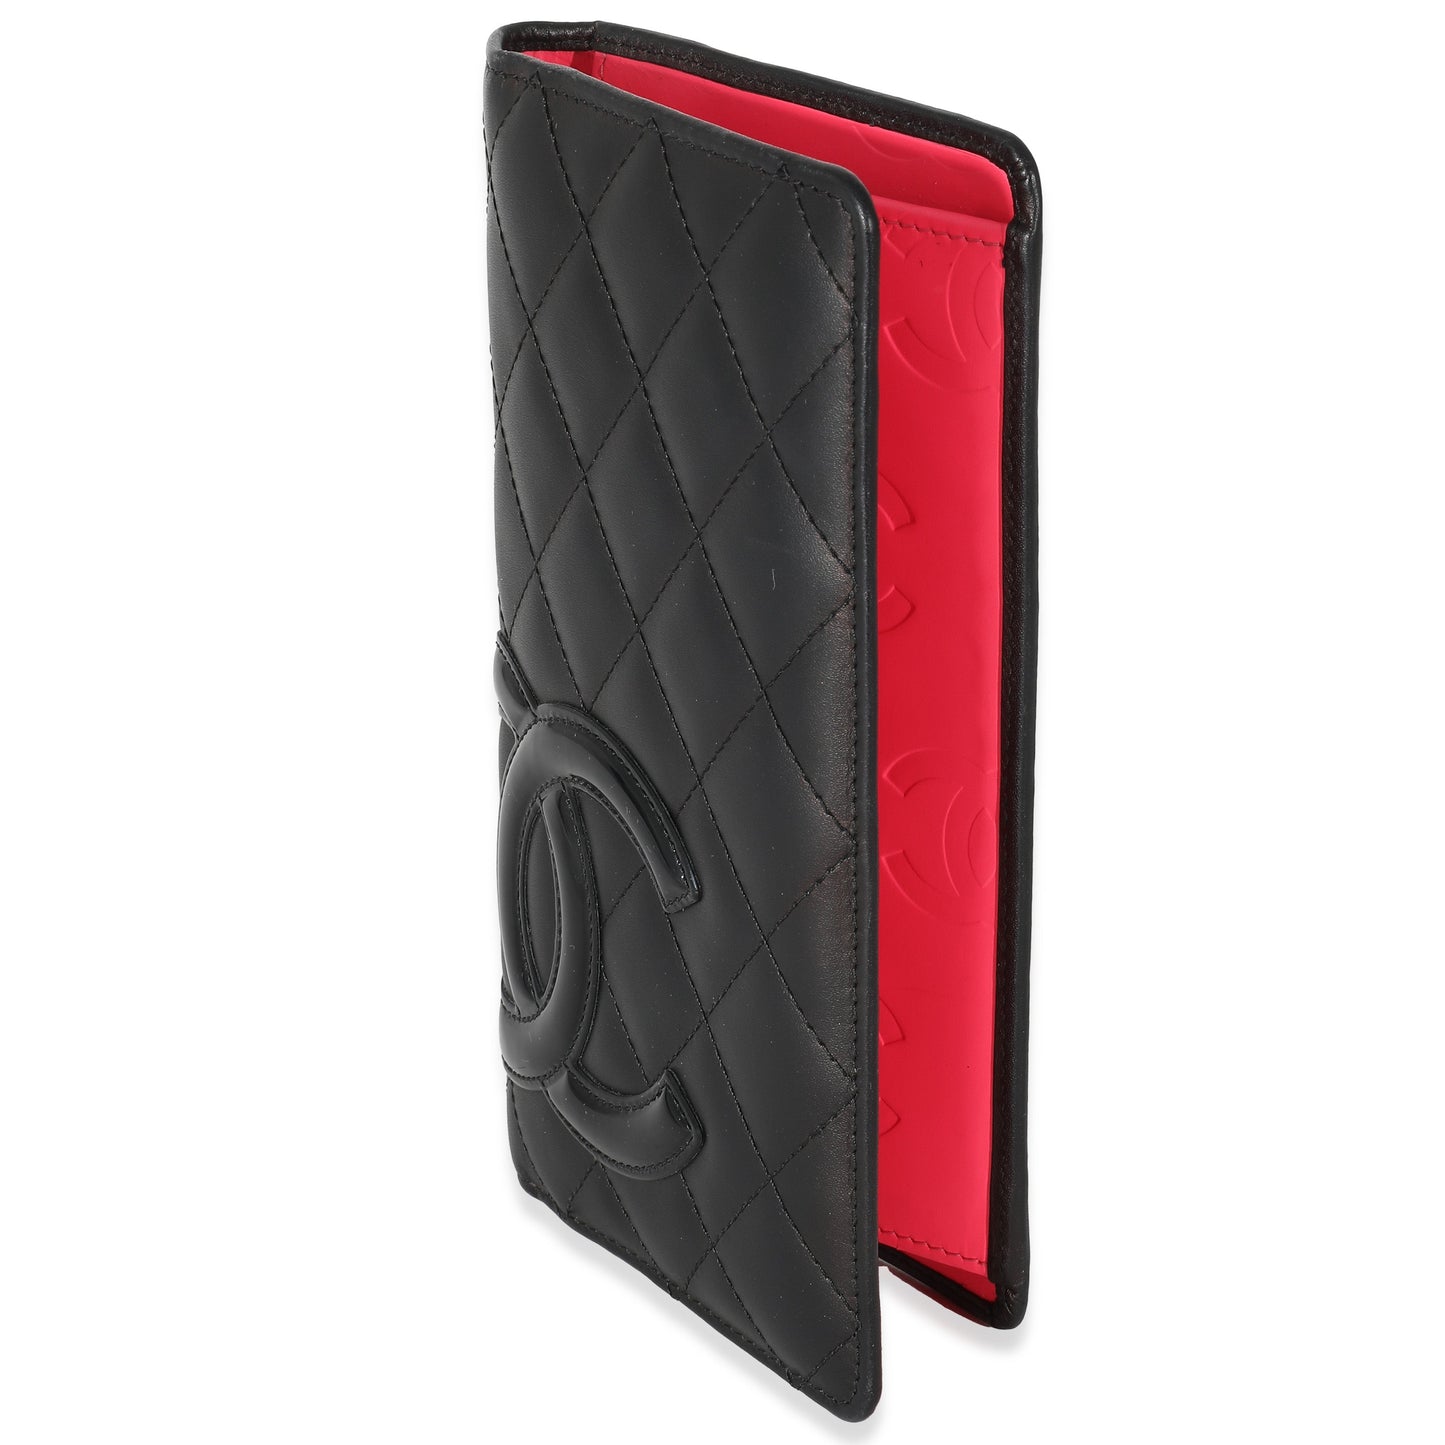 CHANEL - Black Quilted Lambskin Ligne Cambon Vertical Wallet